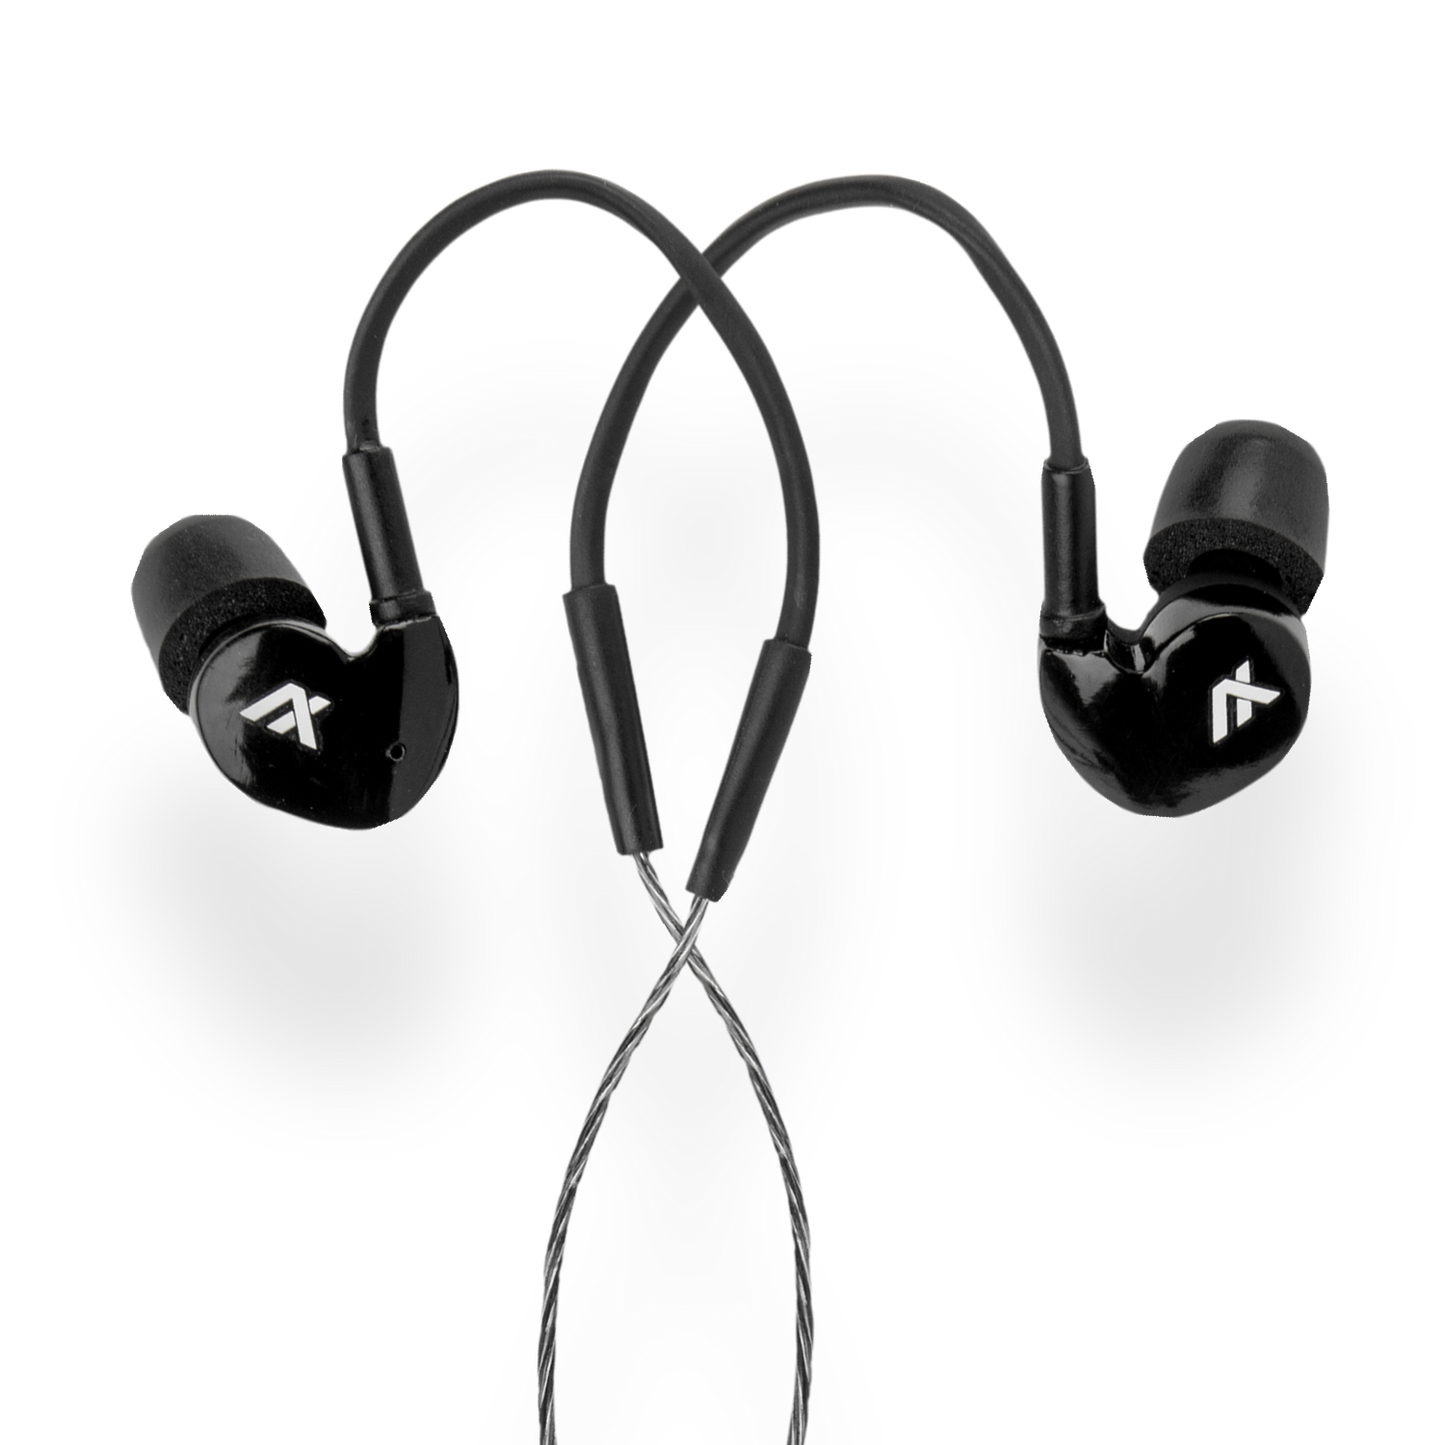 Axil's GS Extreme is the perfect combo of hearing enhancement and protection, striking the quintessential balance between unparalleled quality & excellent value.